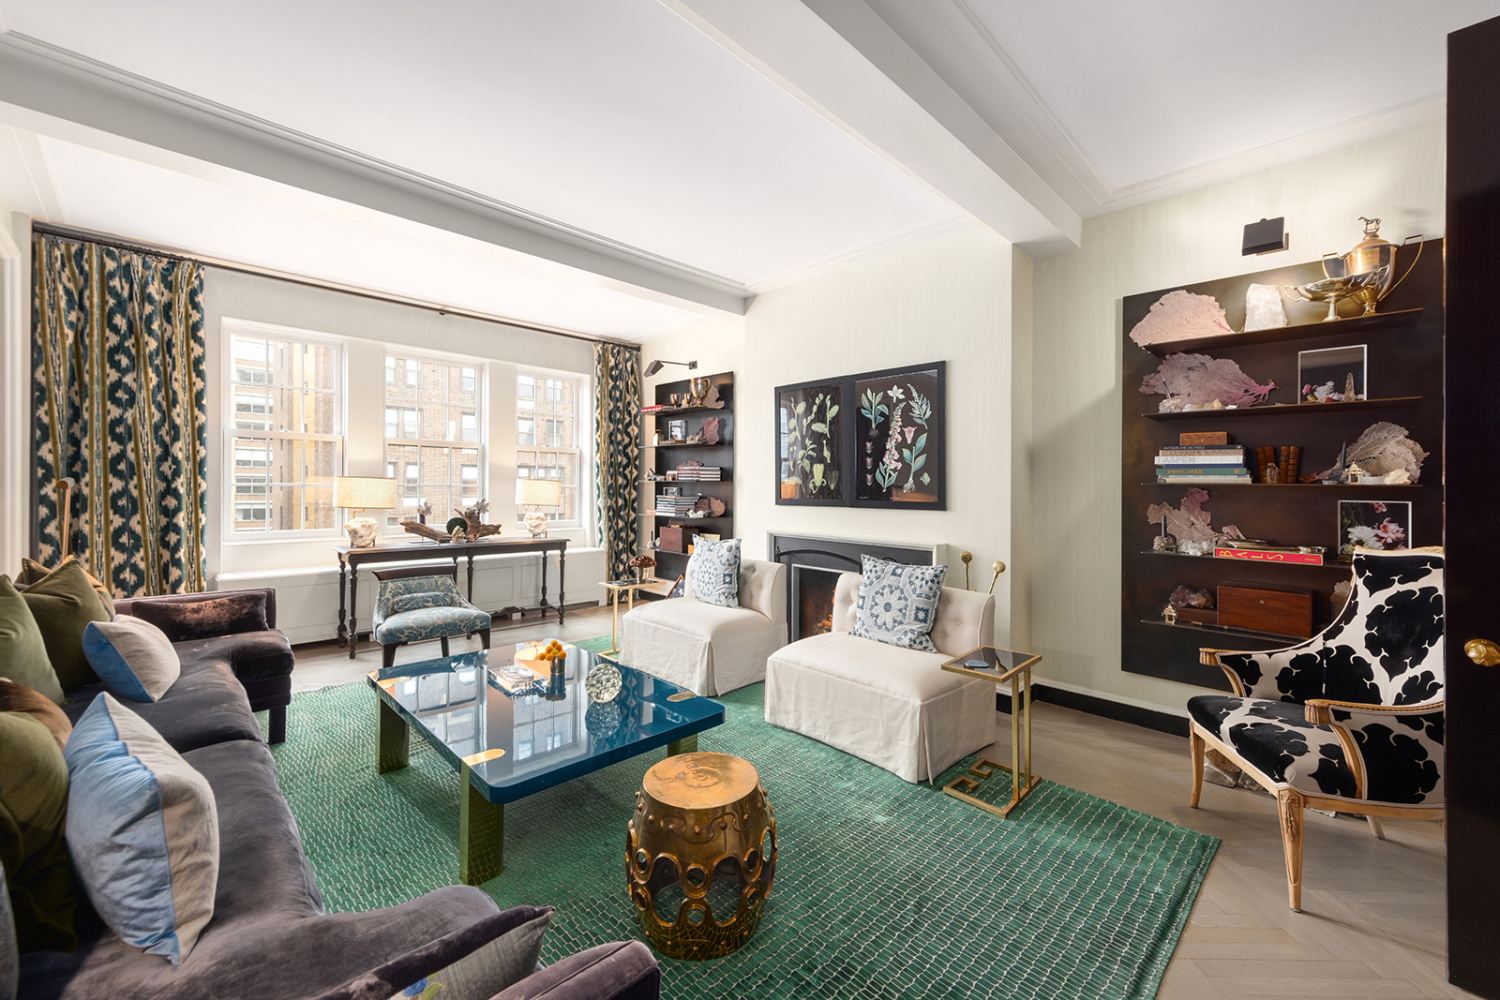 410 East 57th Street 12Be, Sutton, Midtown East, NYC - 4 Bedrooms  
3 Bathrooms  
7 Rooms - 